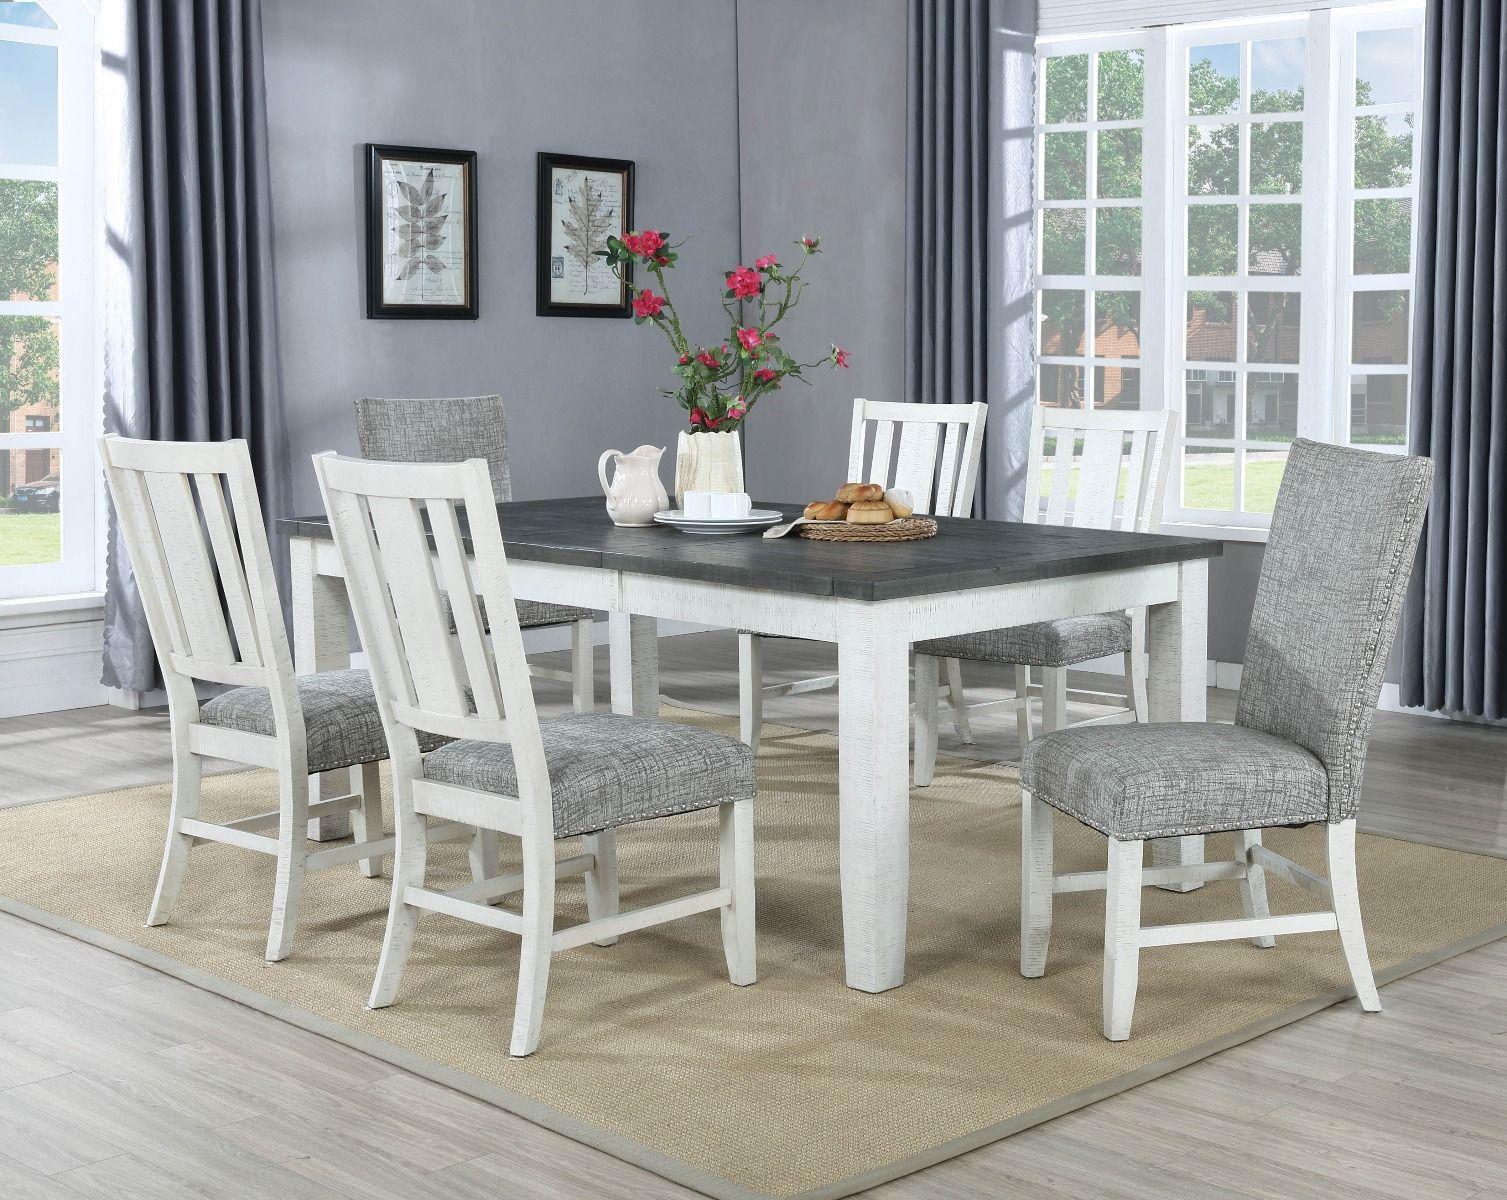 7pc white cottage look dining with 6 chairs